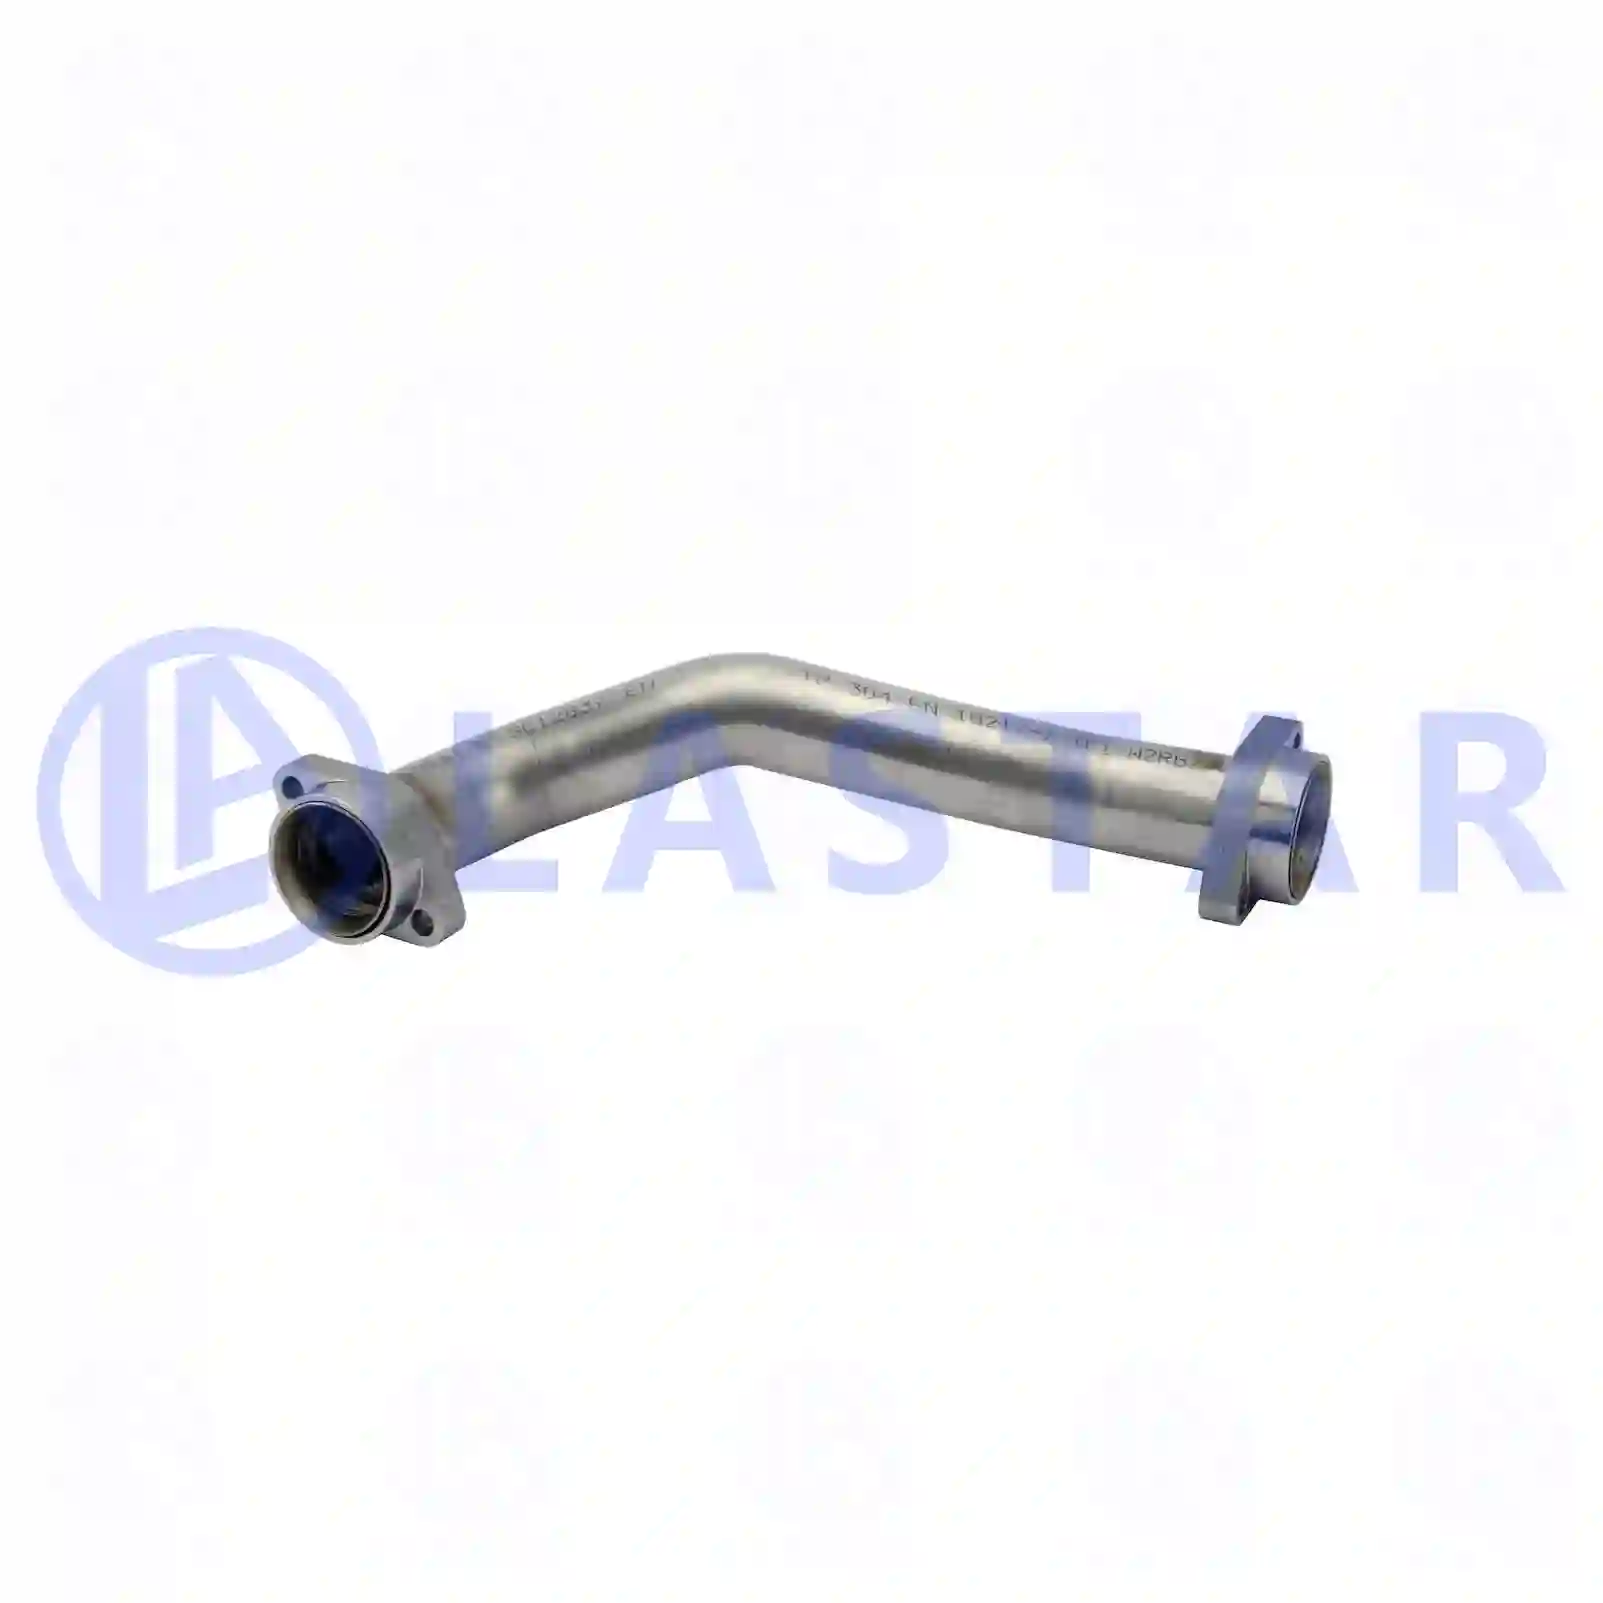 Exhaust manifold, 77702009, 5411401203, 54114 ||  77702009 Lastar Spare Part | Truck Spare Parts, Auotomotive Spare Parts Exhaust manifold, 77702009, 5411401203, 54114 ||  77702009 Lastar Spare Part | Truck Spare Parts, Auotomotive Spare Parts